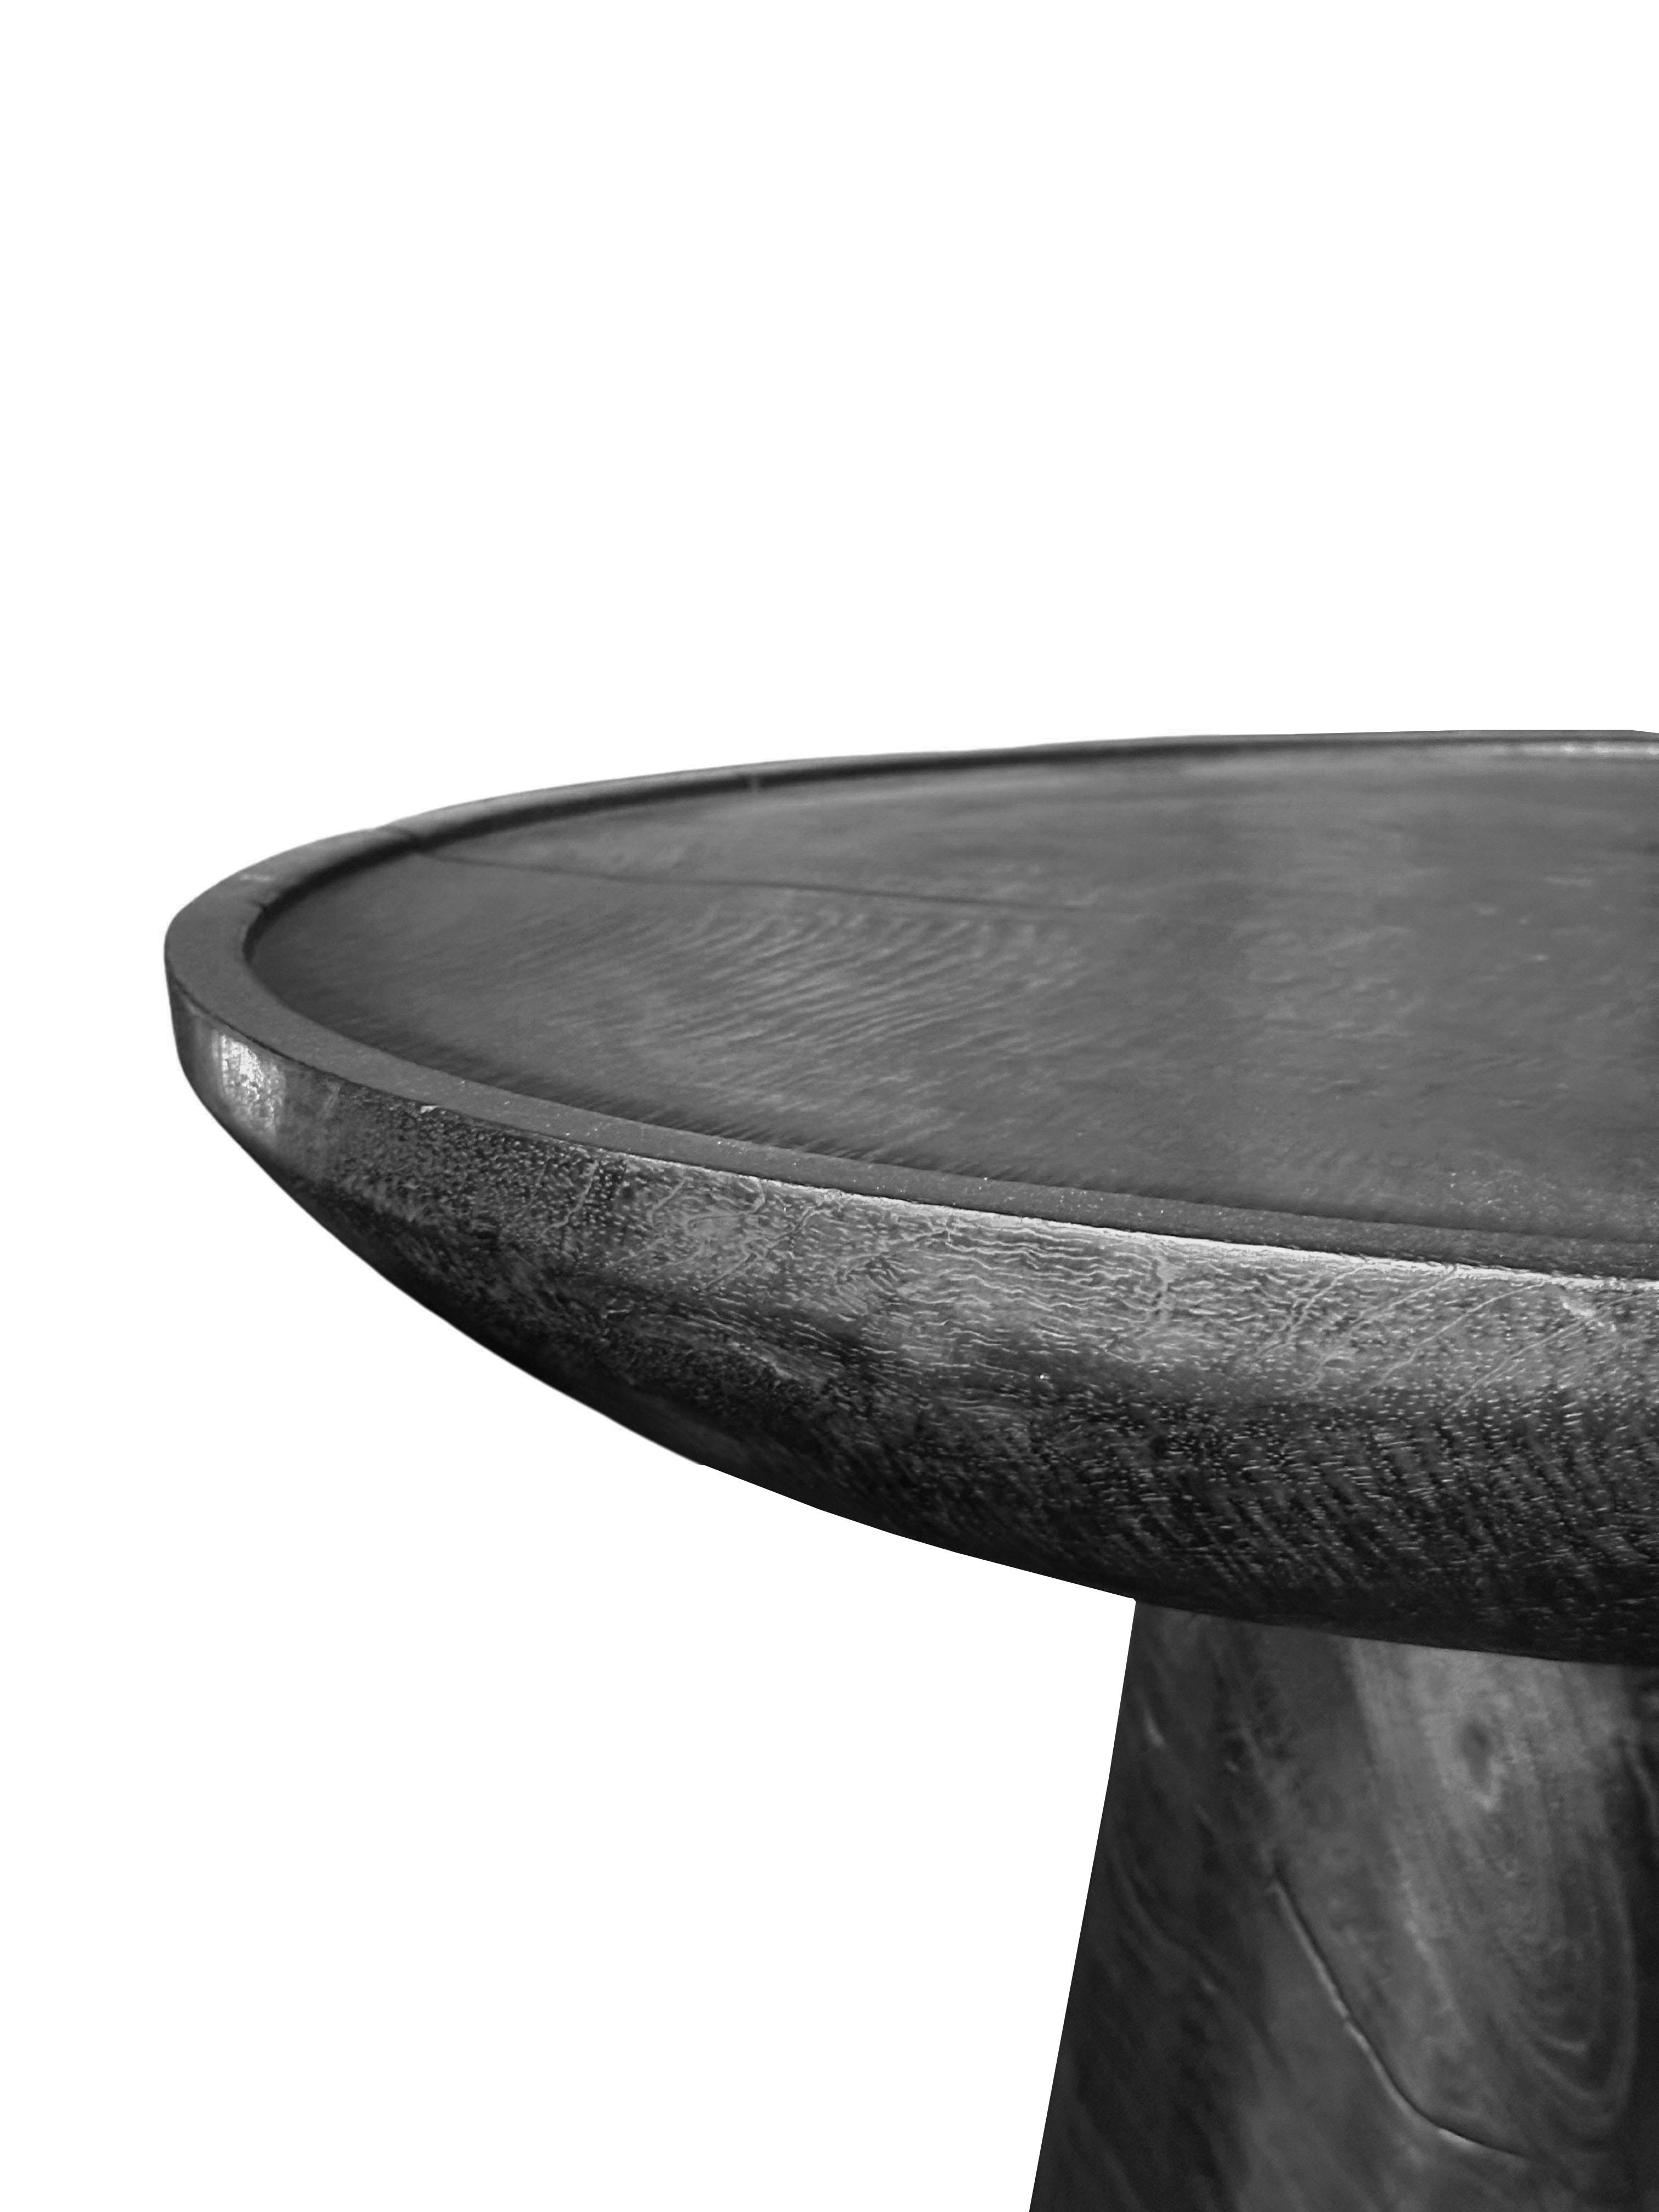 Hand-Crafted Round Side Table Crafted from Mango Wood Burnt Finish For Sale